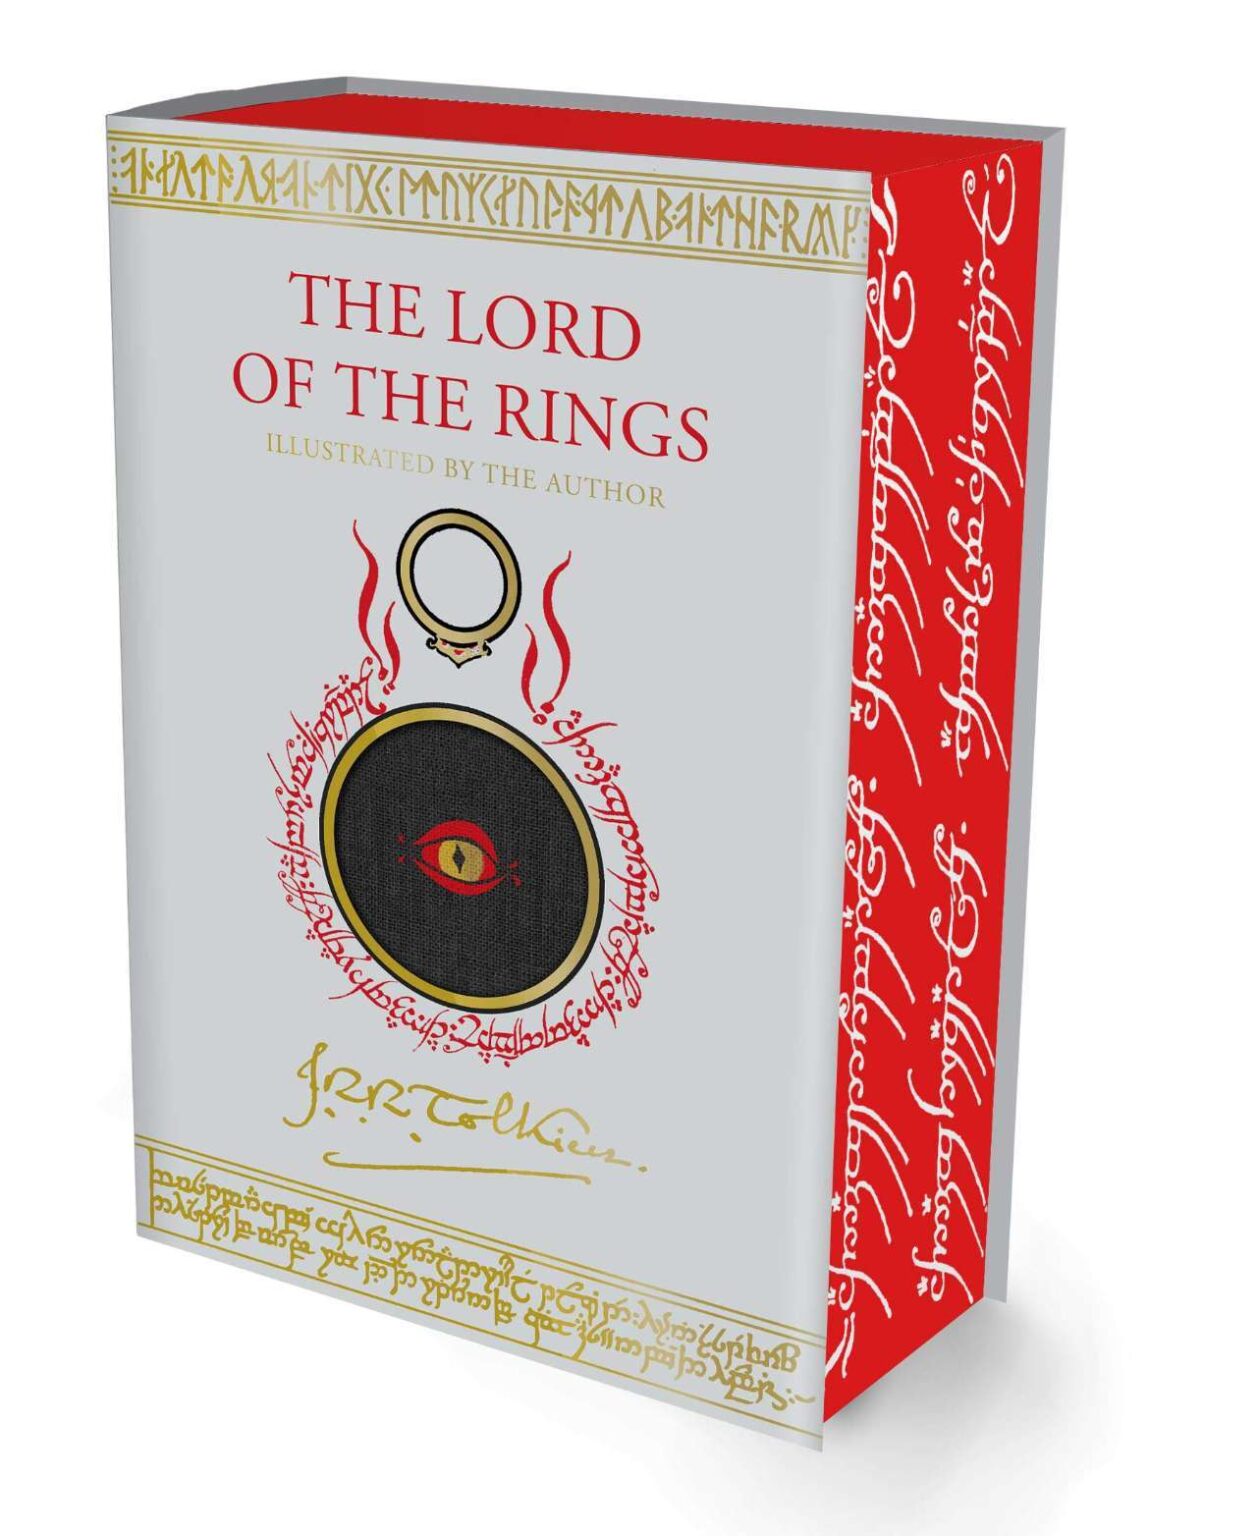 A new edition of The Lord of the Rings J.R.R. Tolkien Illustrated